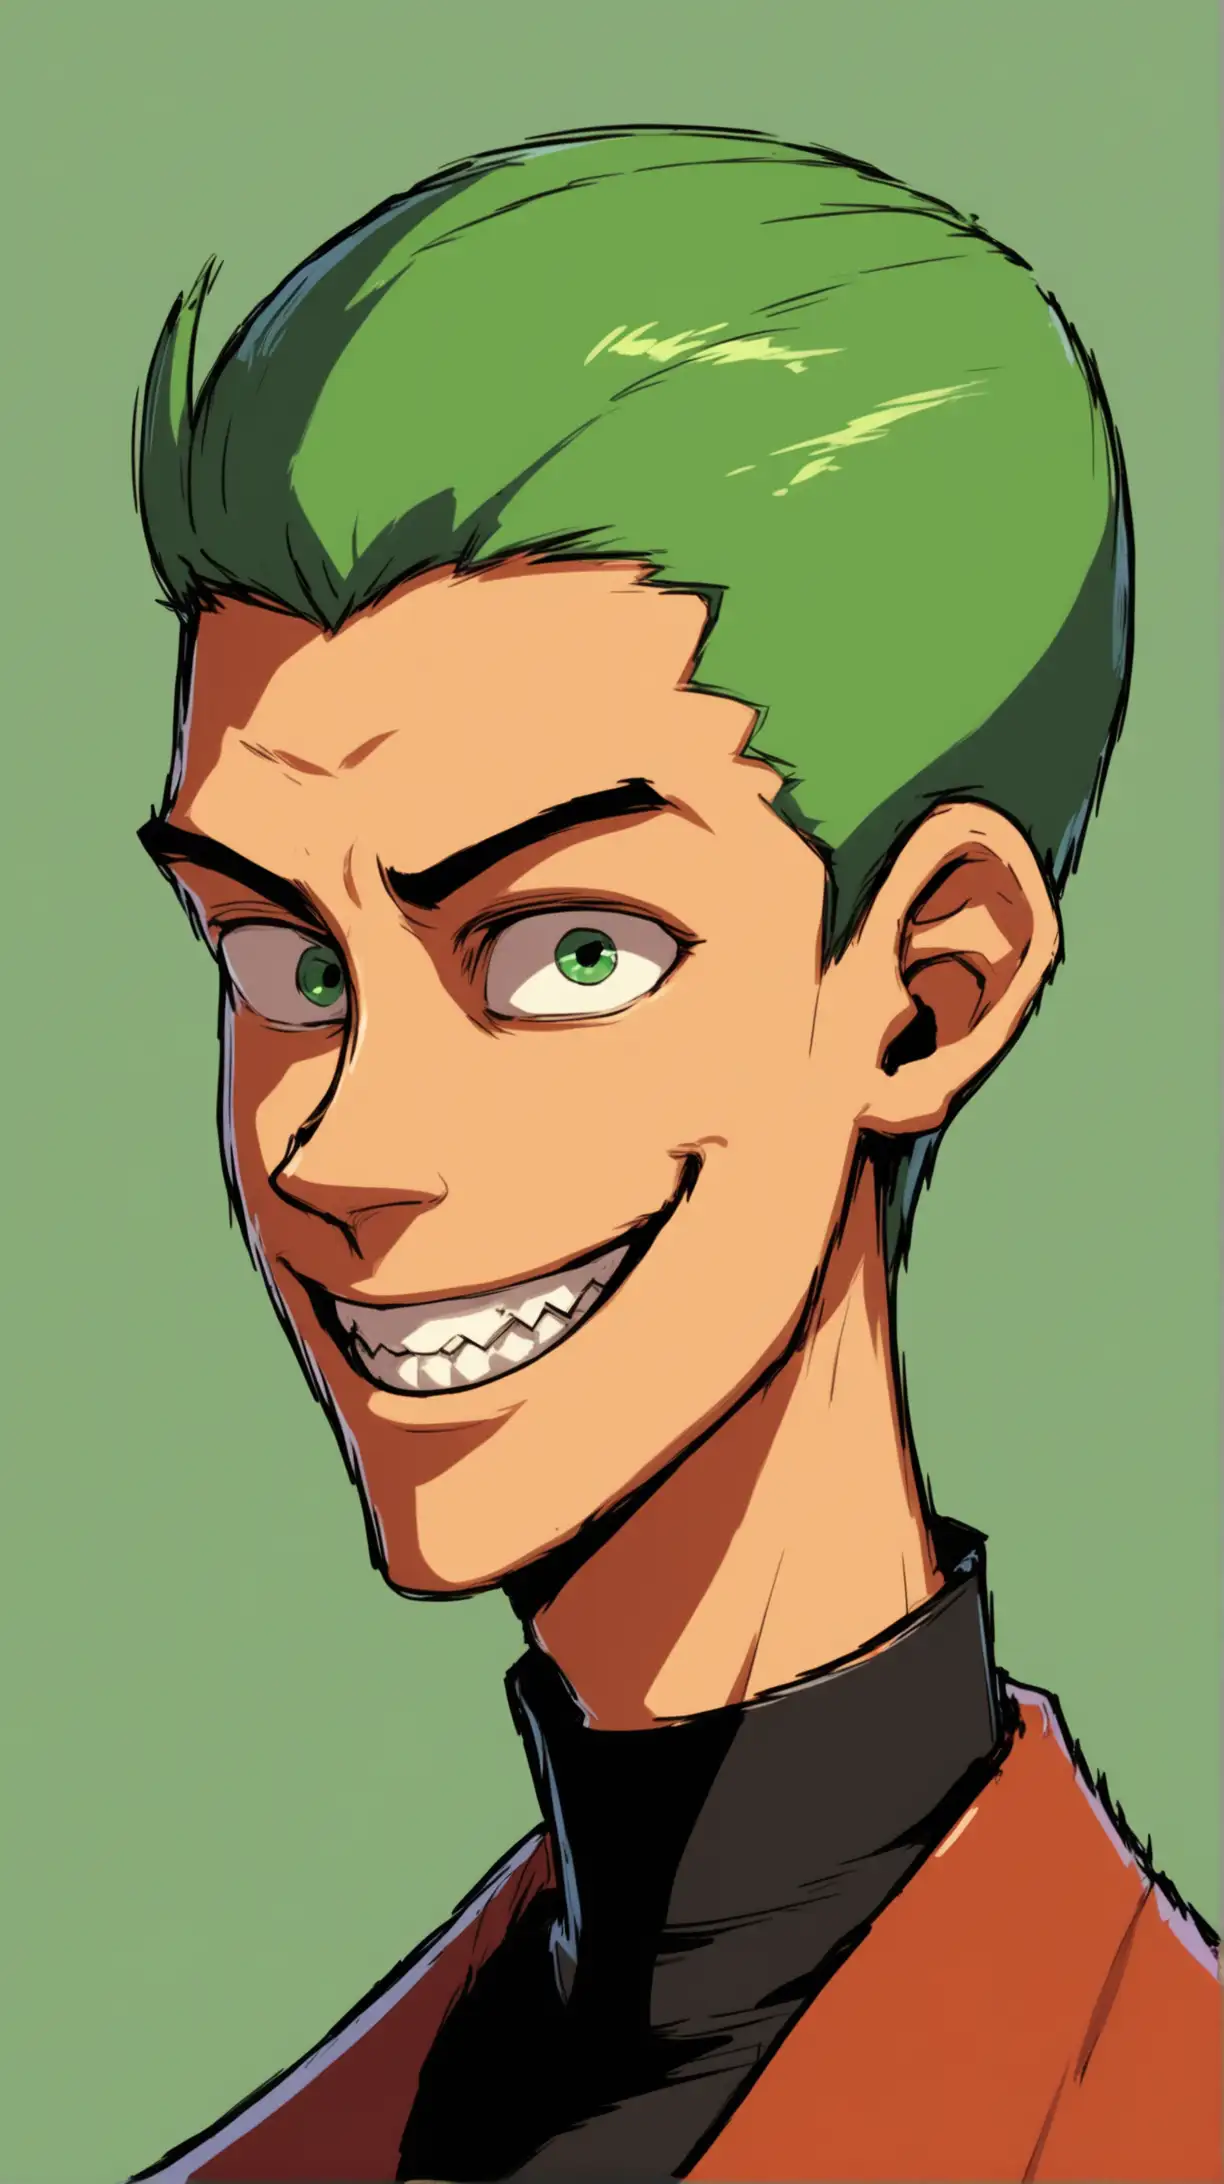 Mischievous Young Man with a Cartoony Grin